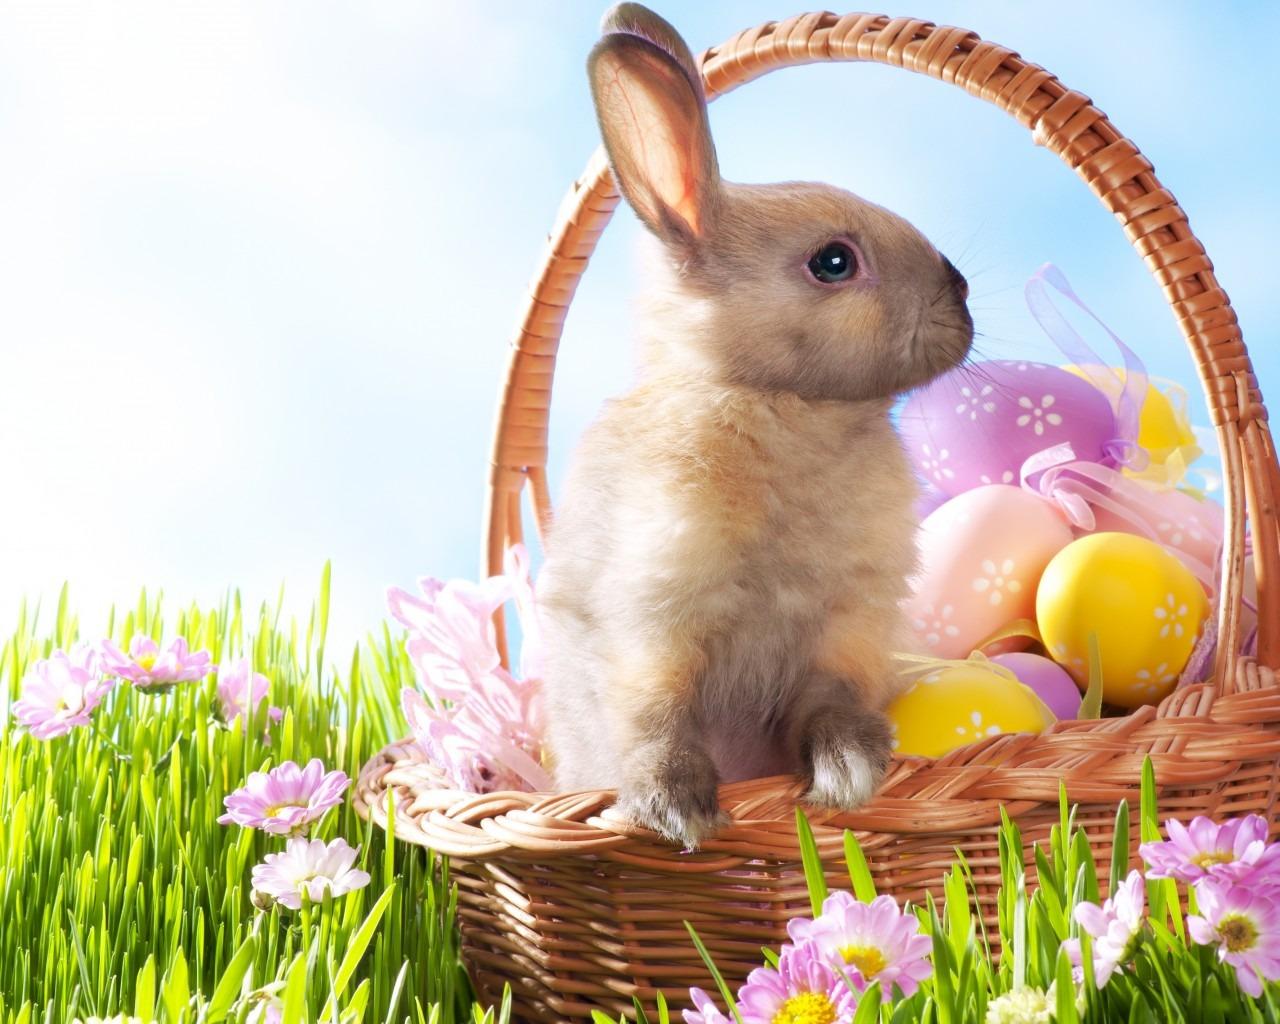 Why do Easter dates move around and why the Easter Bunny?